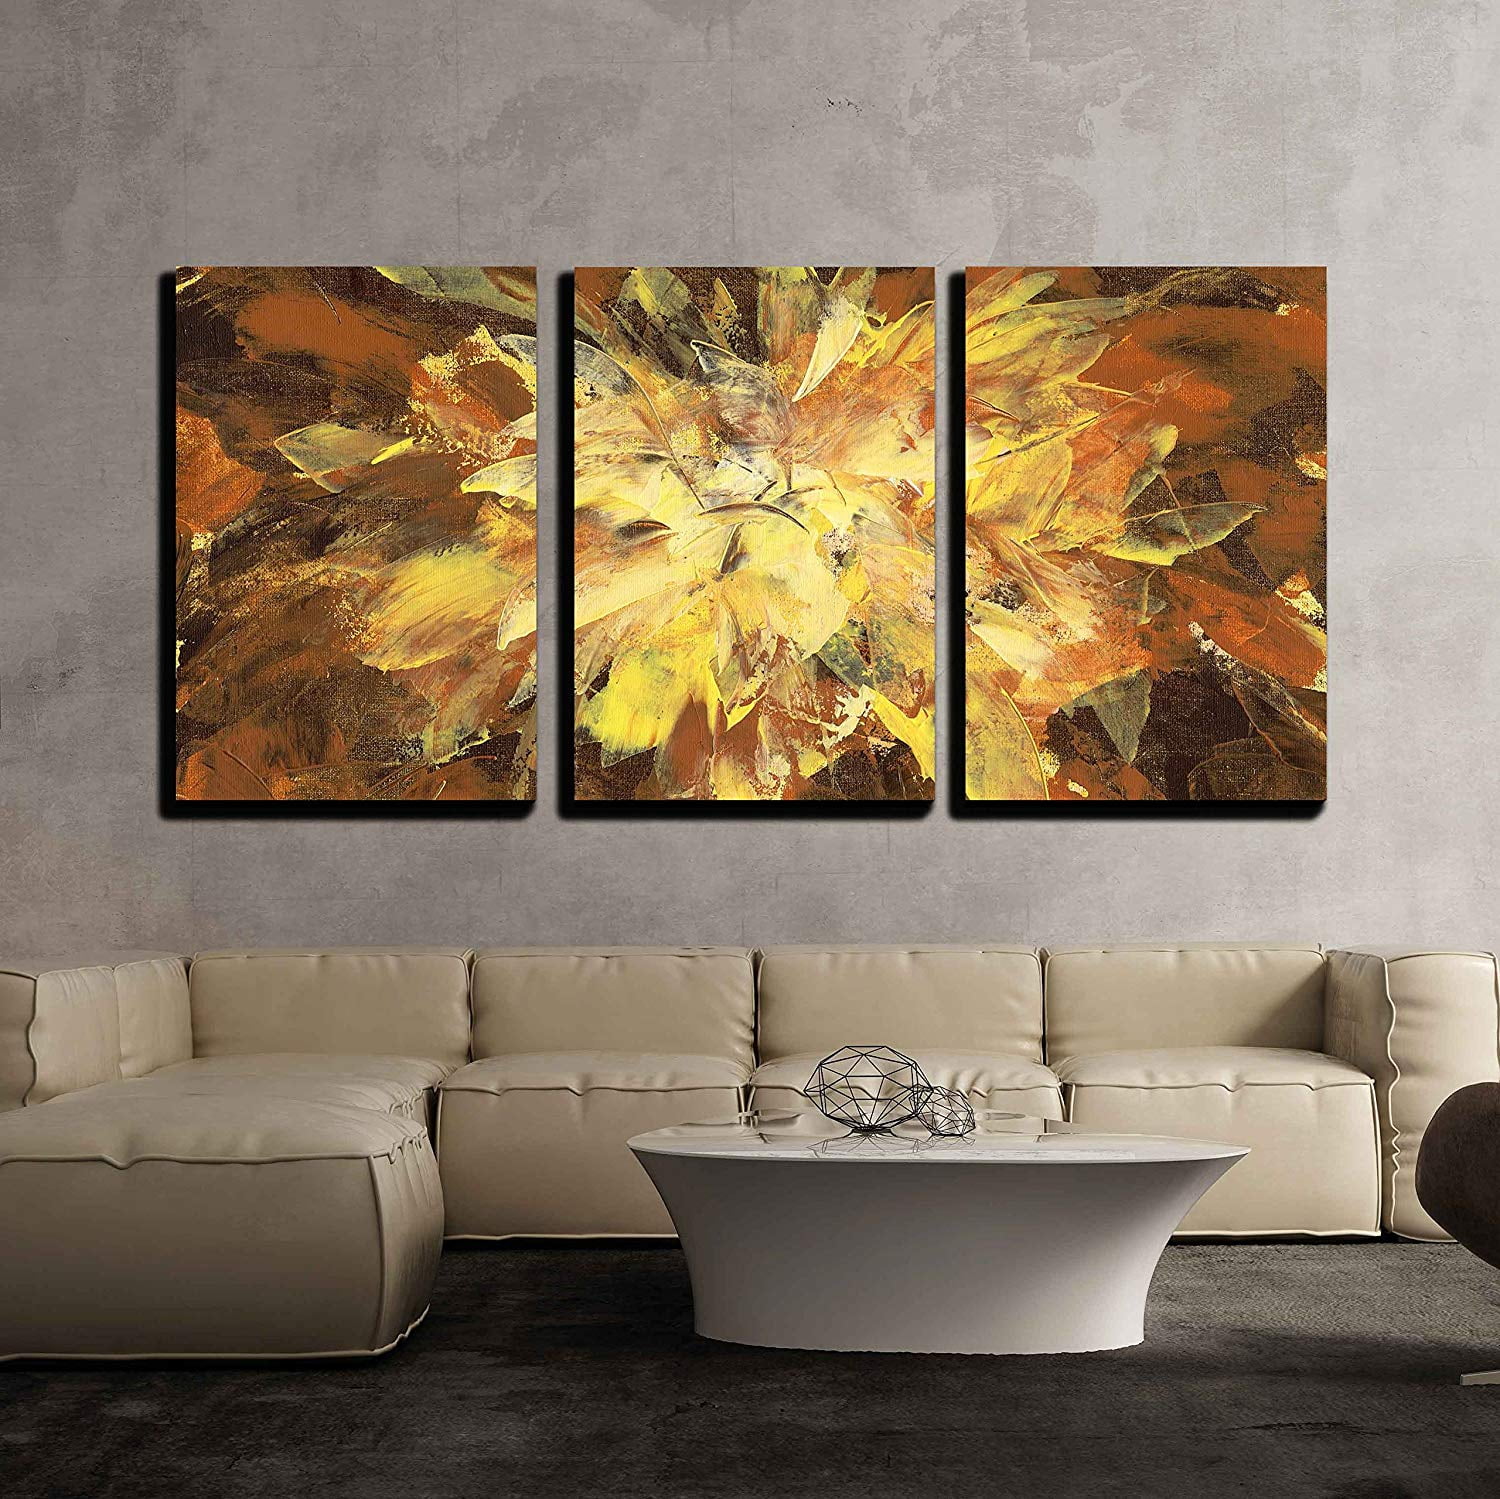 Wall26 3 Piece Canvas Wall Art - Abstract Backround Handmade Oil